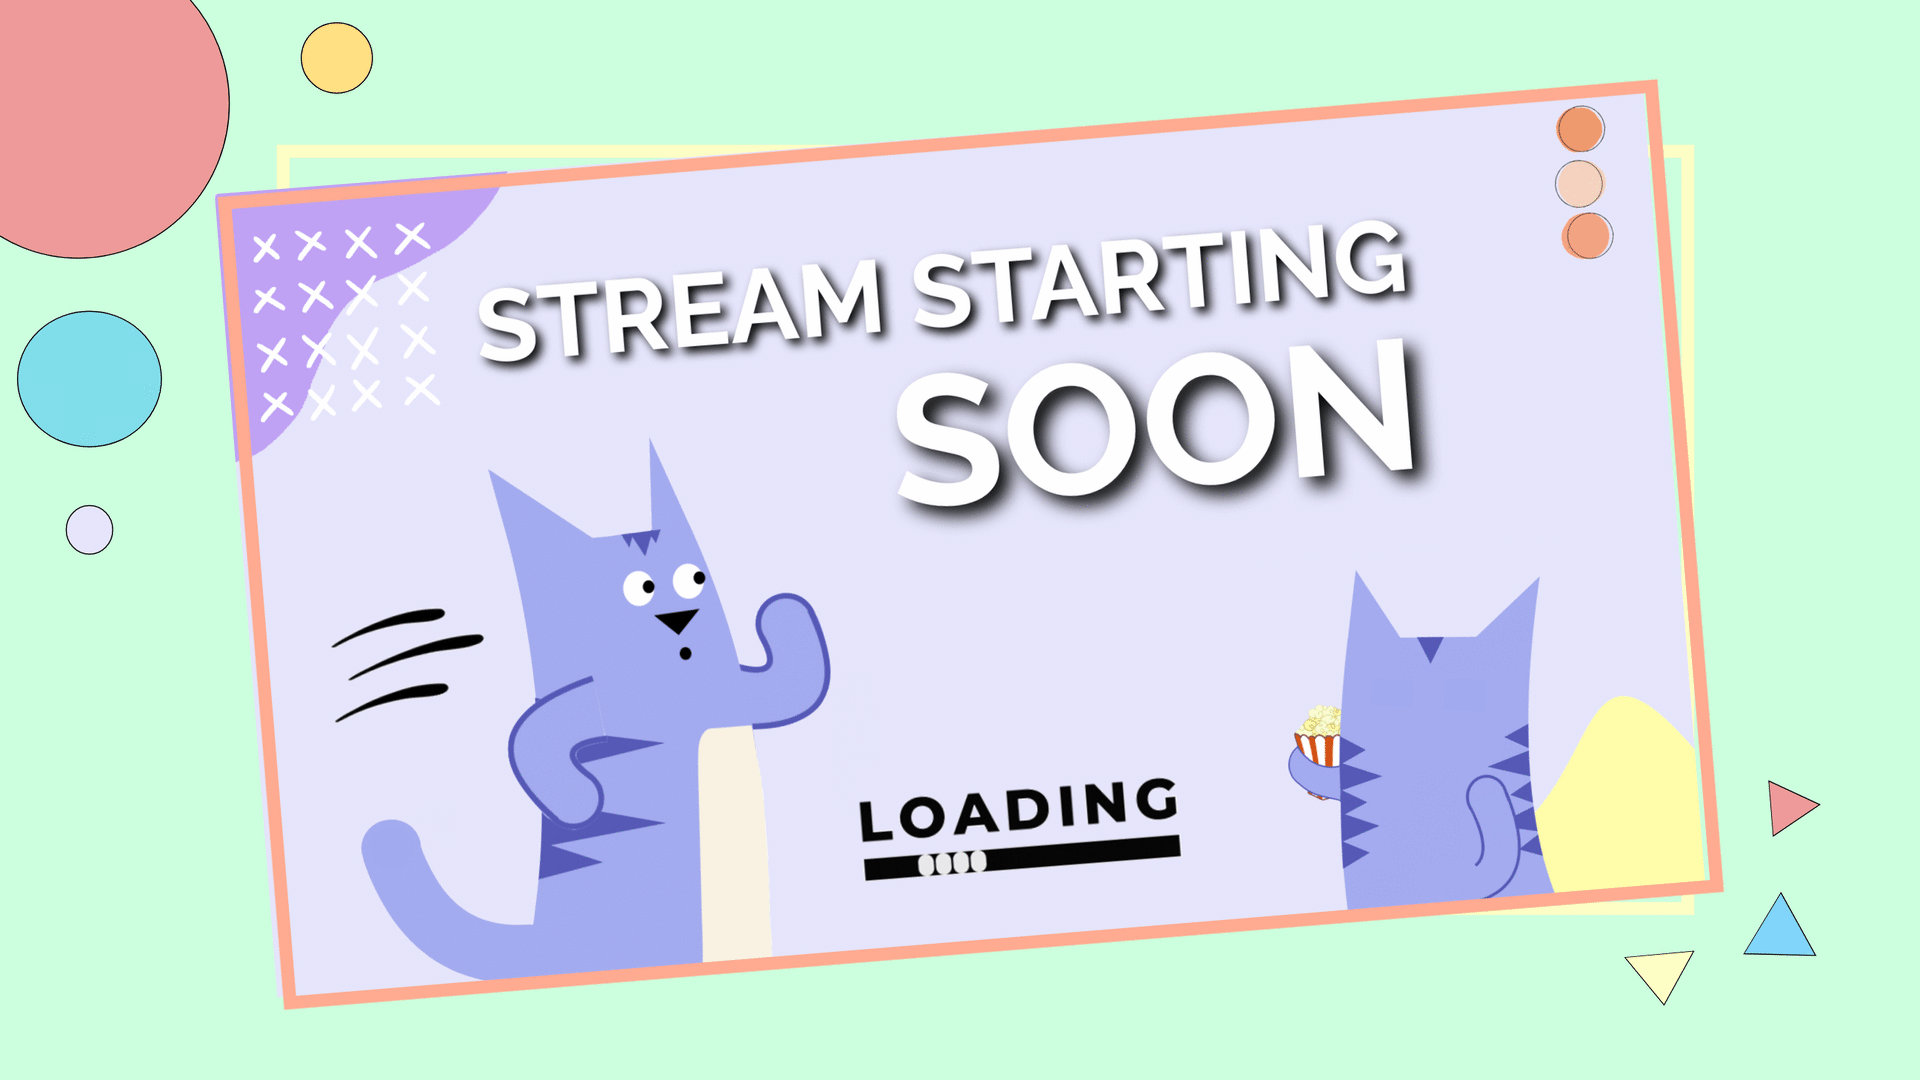 How to Make a Twitch Screen: Starting Soon, BRB, and Offline Screens